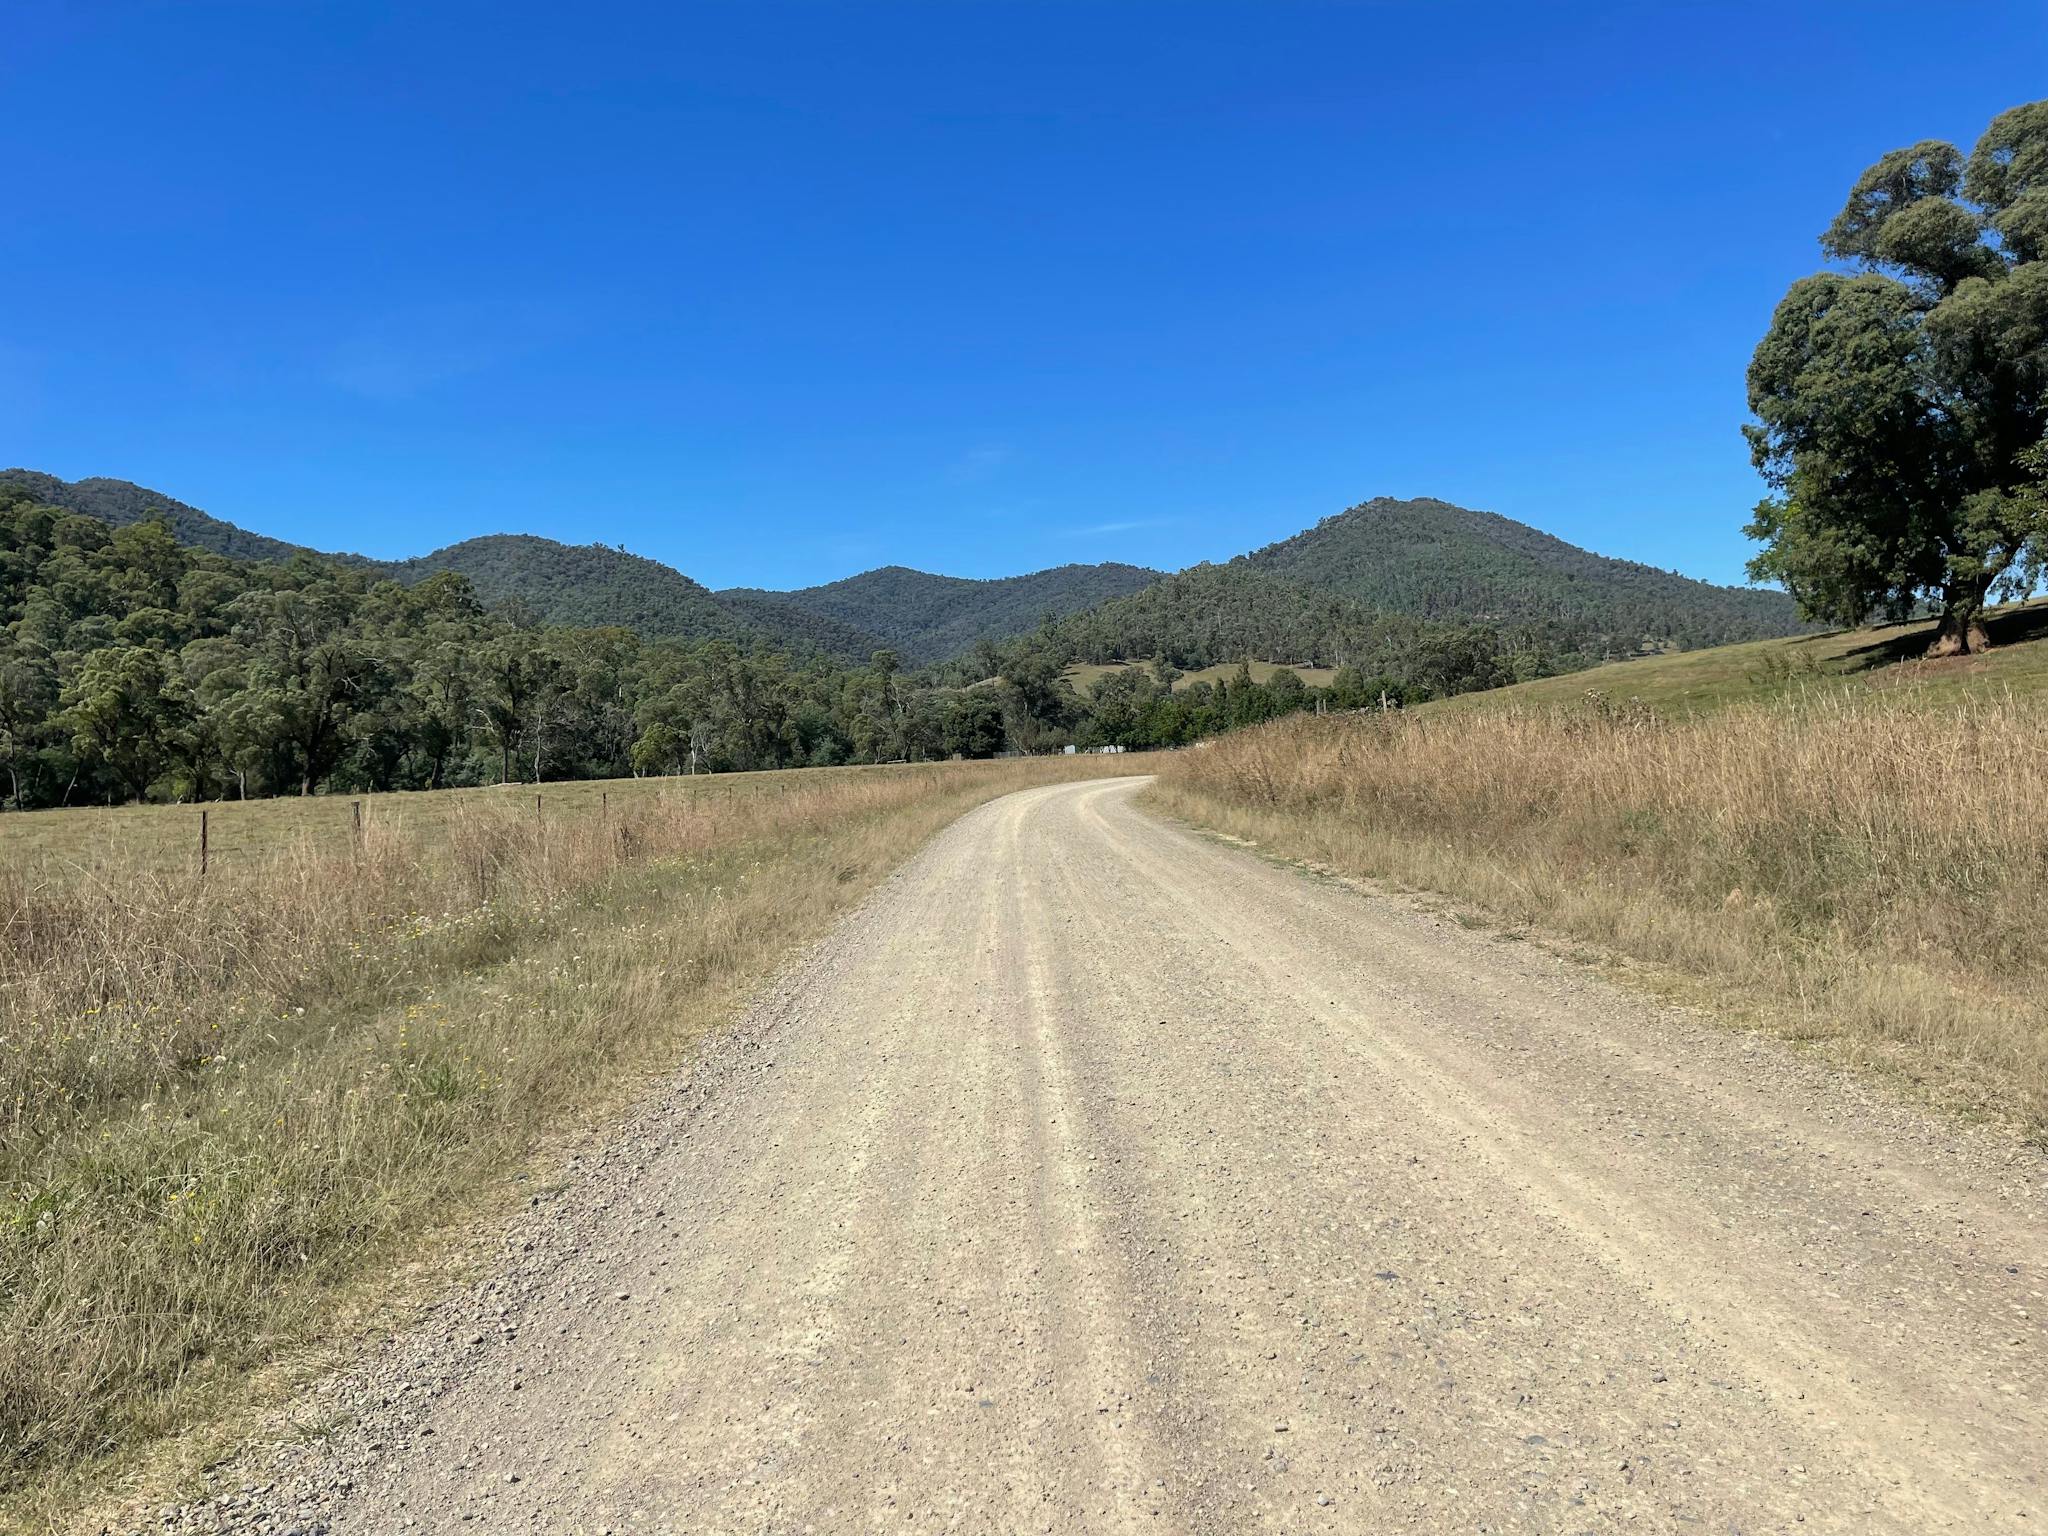 Gravel road with grey dirt, grass, hills, trees, blue sky